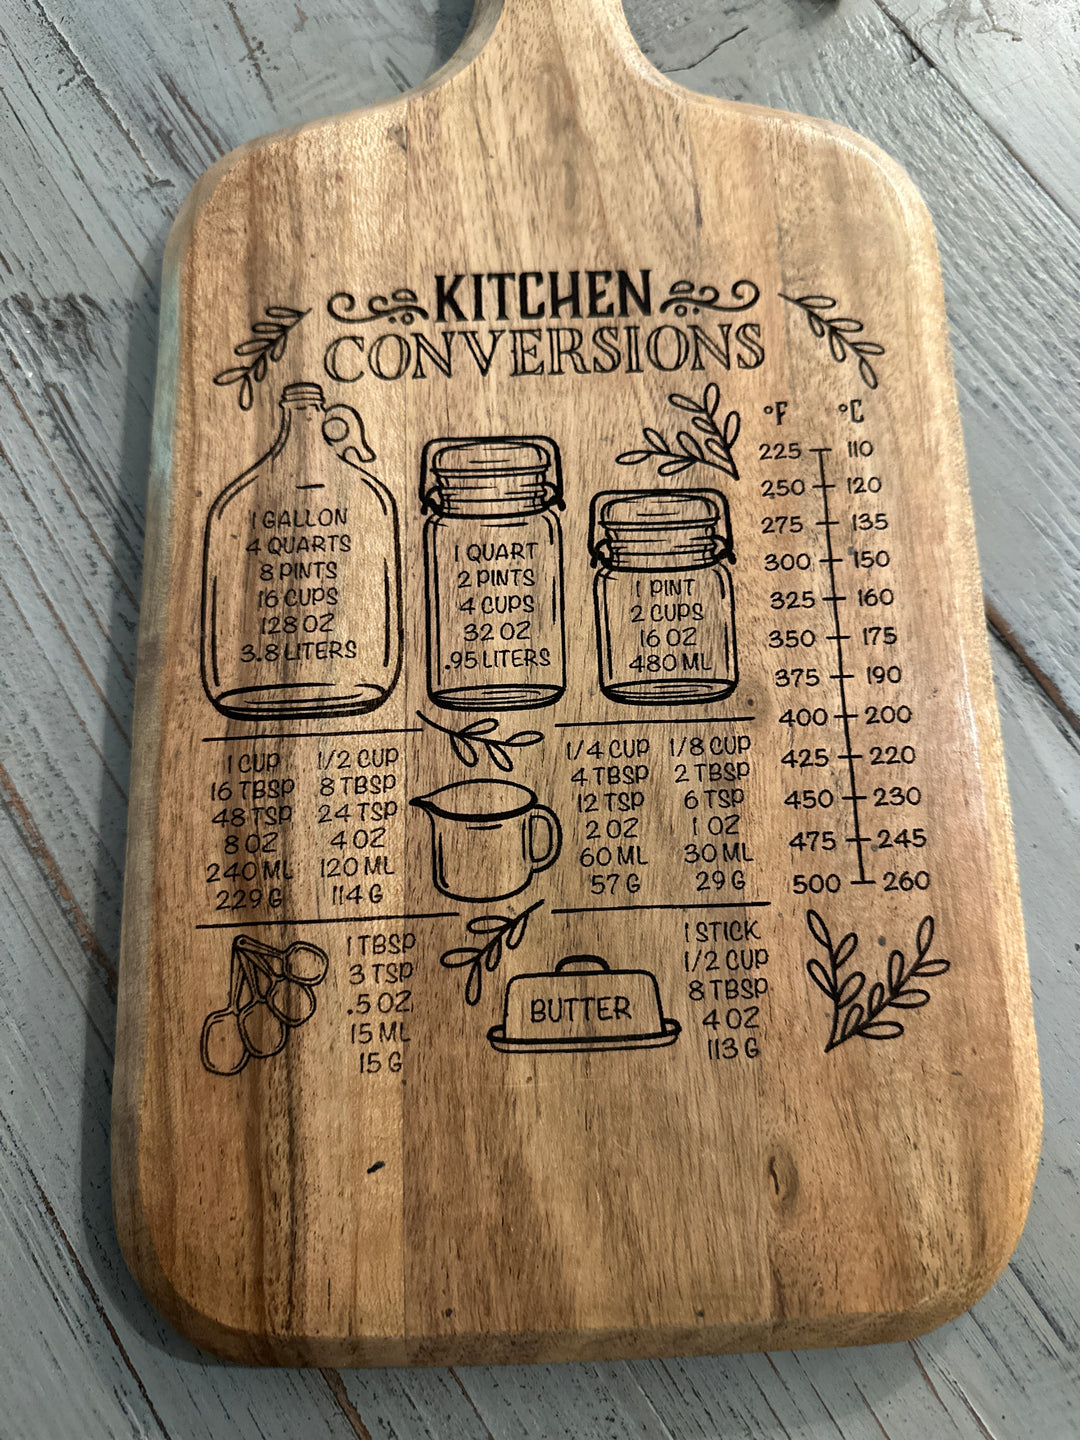 Wooden Cutting Board (17”x7”) | Kitchen Decor | Cheese Board | Various  Designs